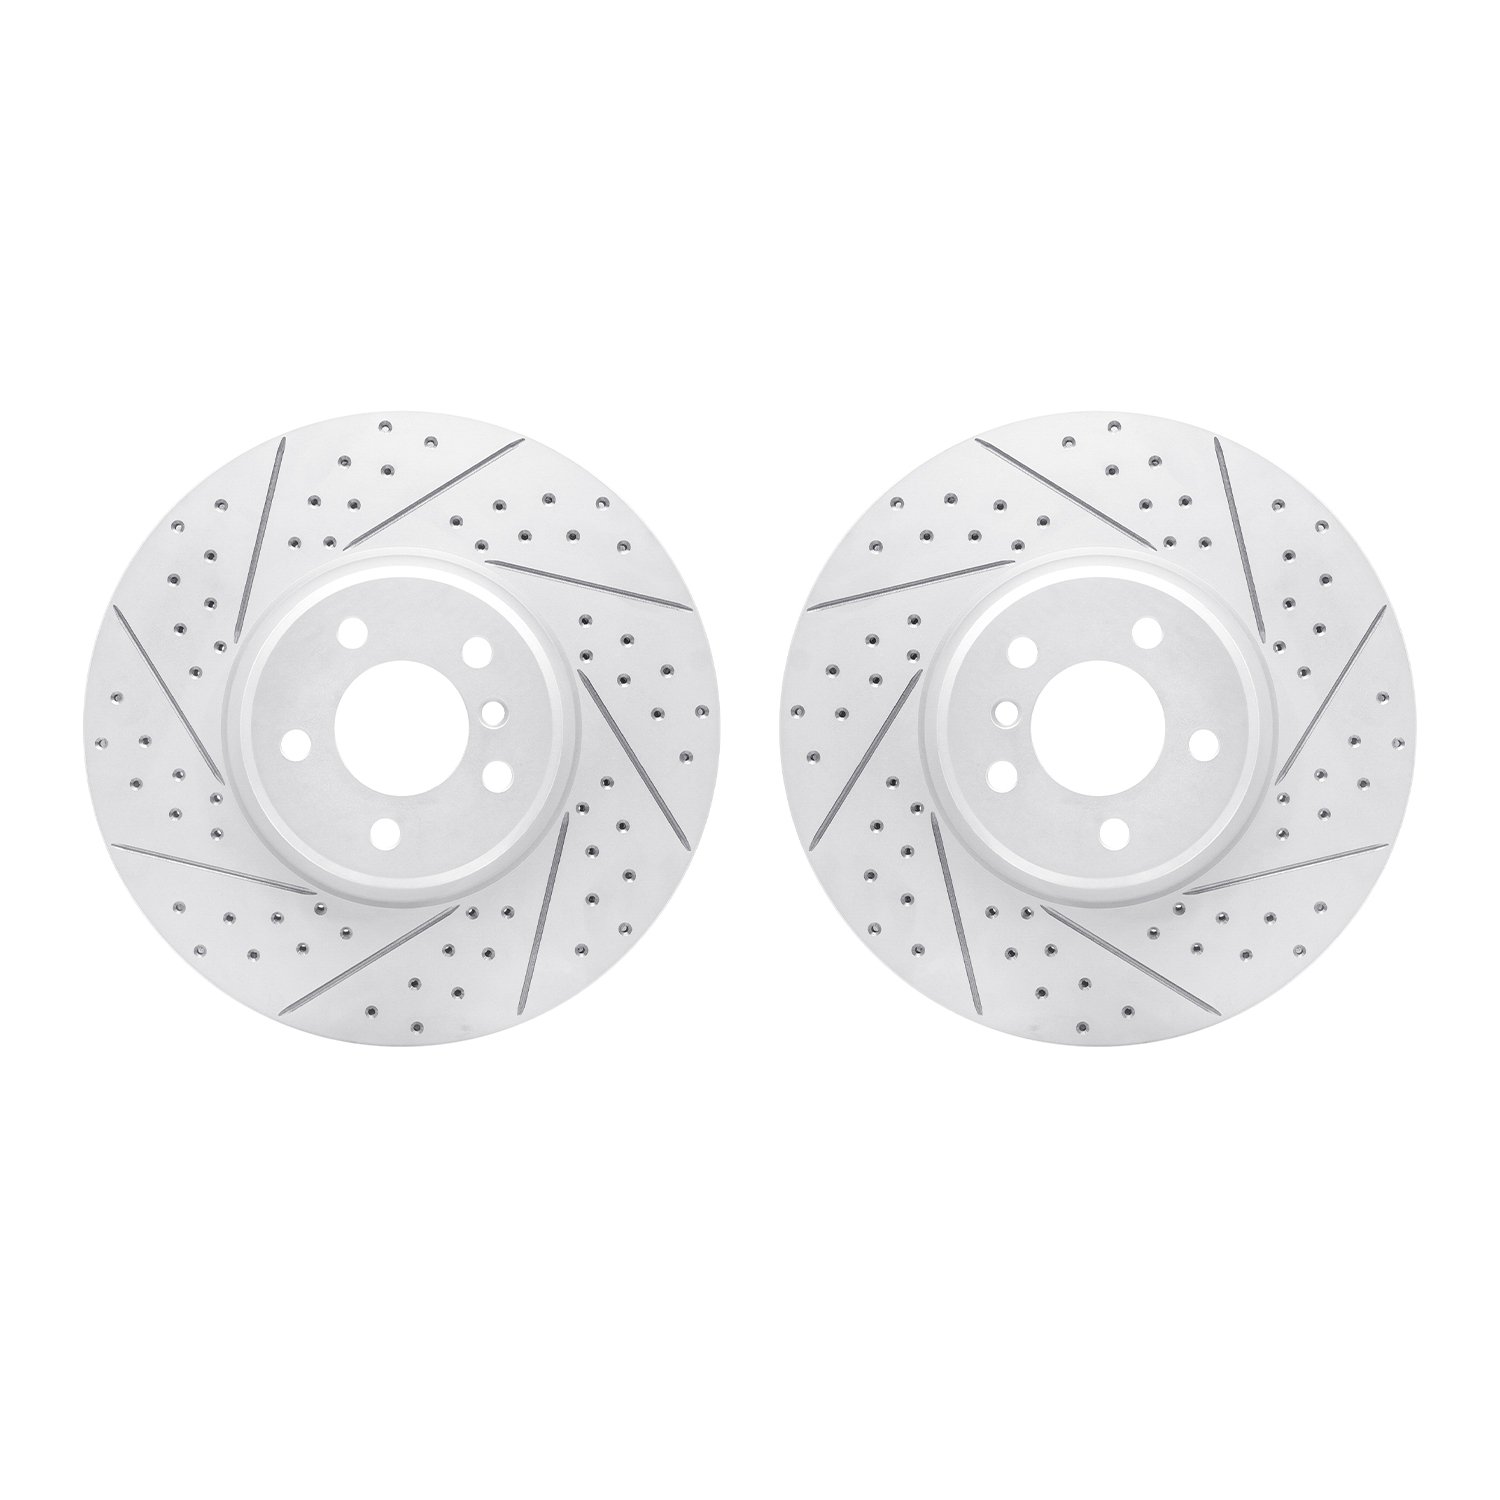 2002-31048 Geoperformance Drilled/Slotted Brake Rotors, 2008-2019 BMW, Position: Front